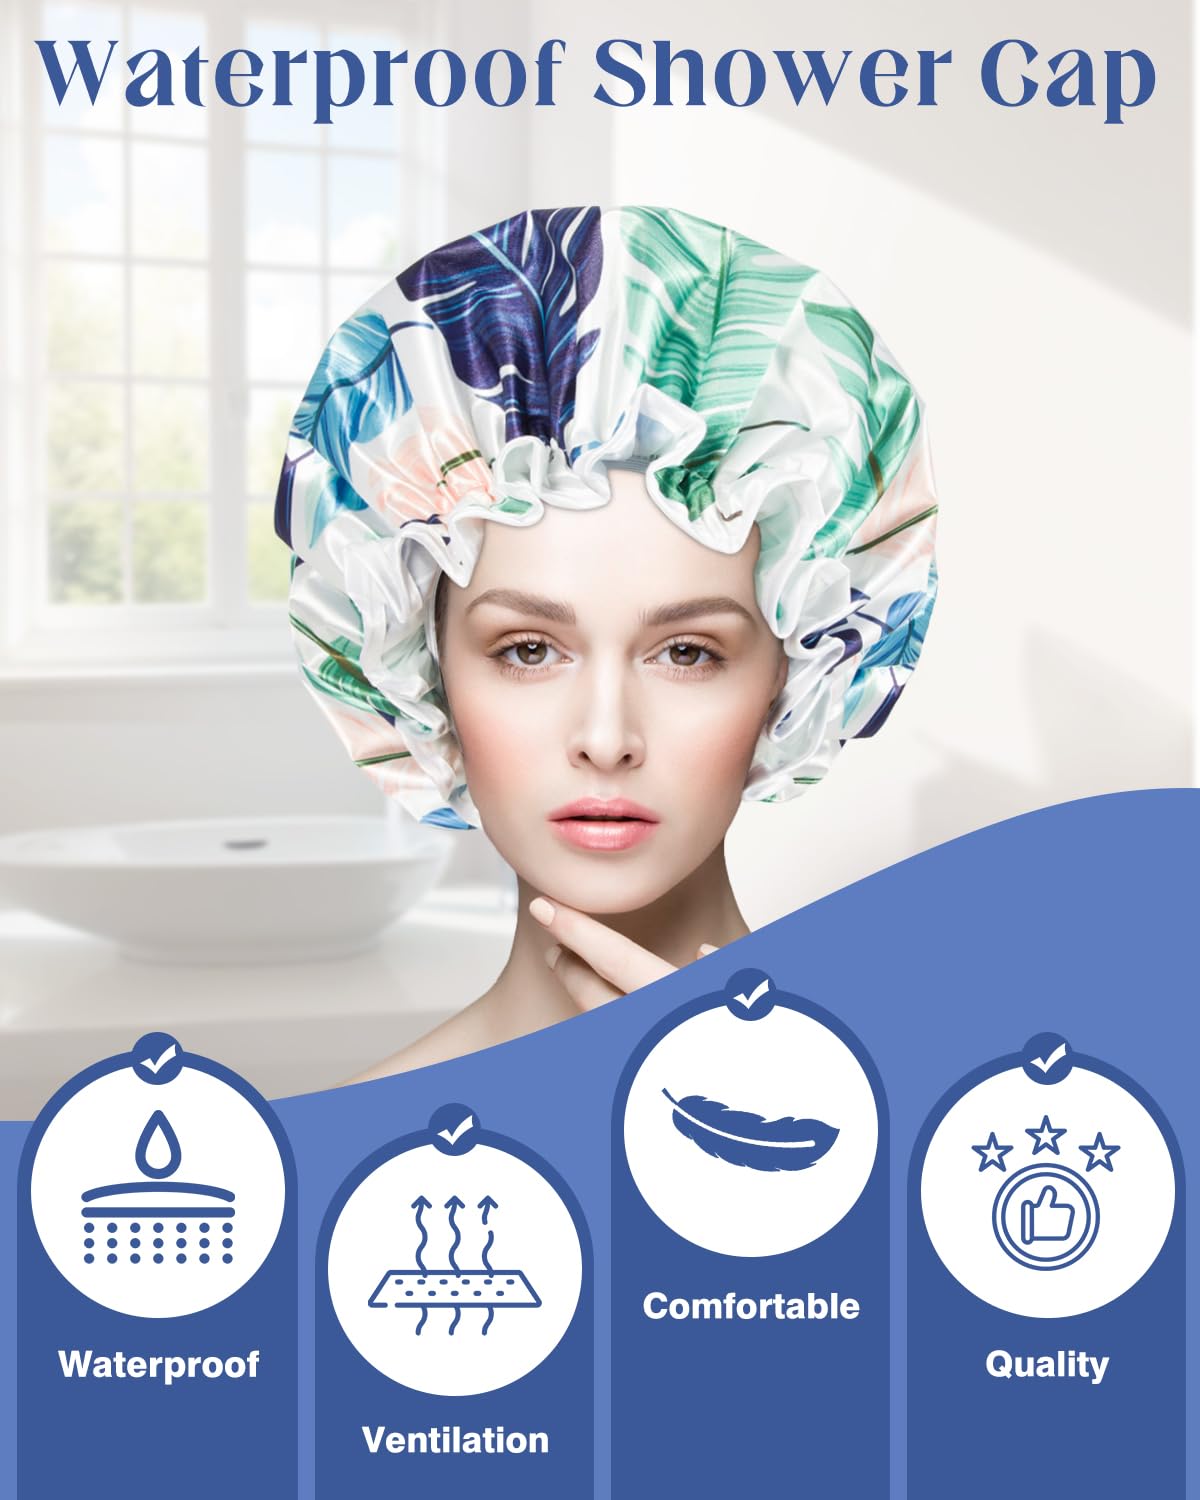 Auban Shower Caps, Reusable Shower Cap for Women, Double Layer Waterproof Hair Cap, Large Size for All Hair Lengths,for Girls Spa Home Salon Use